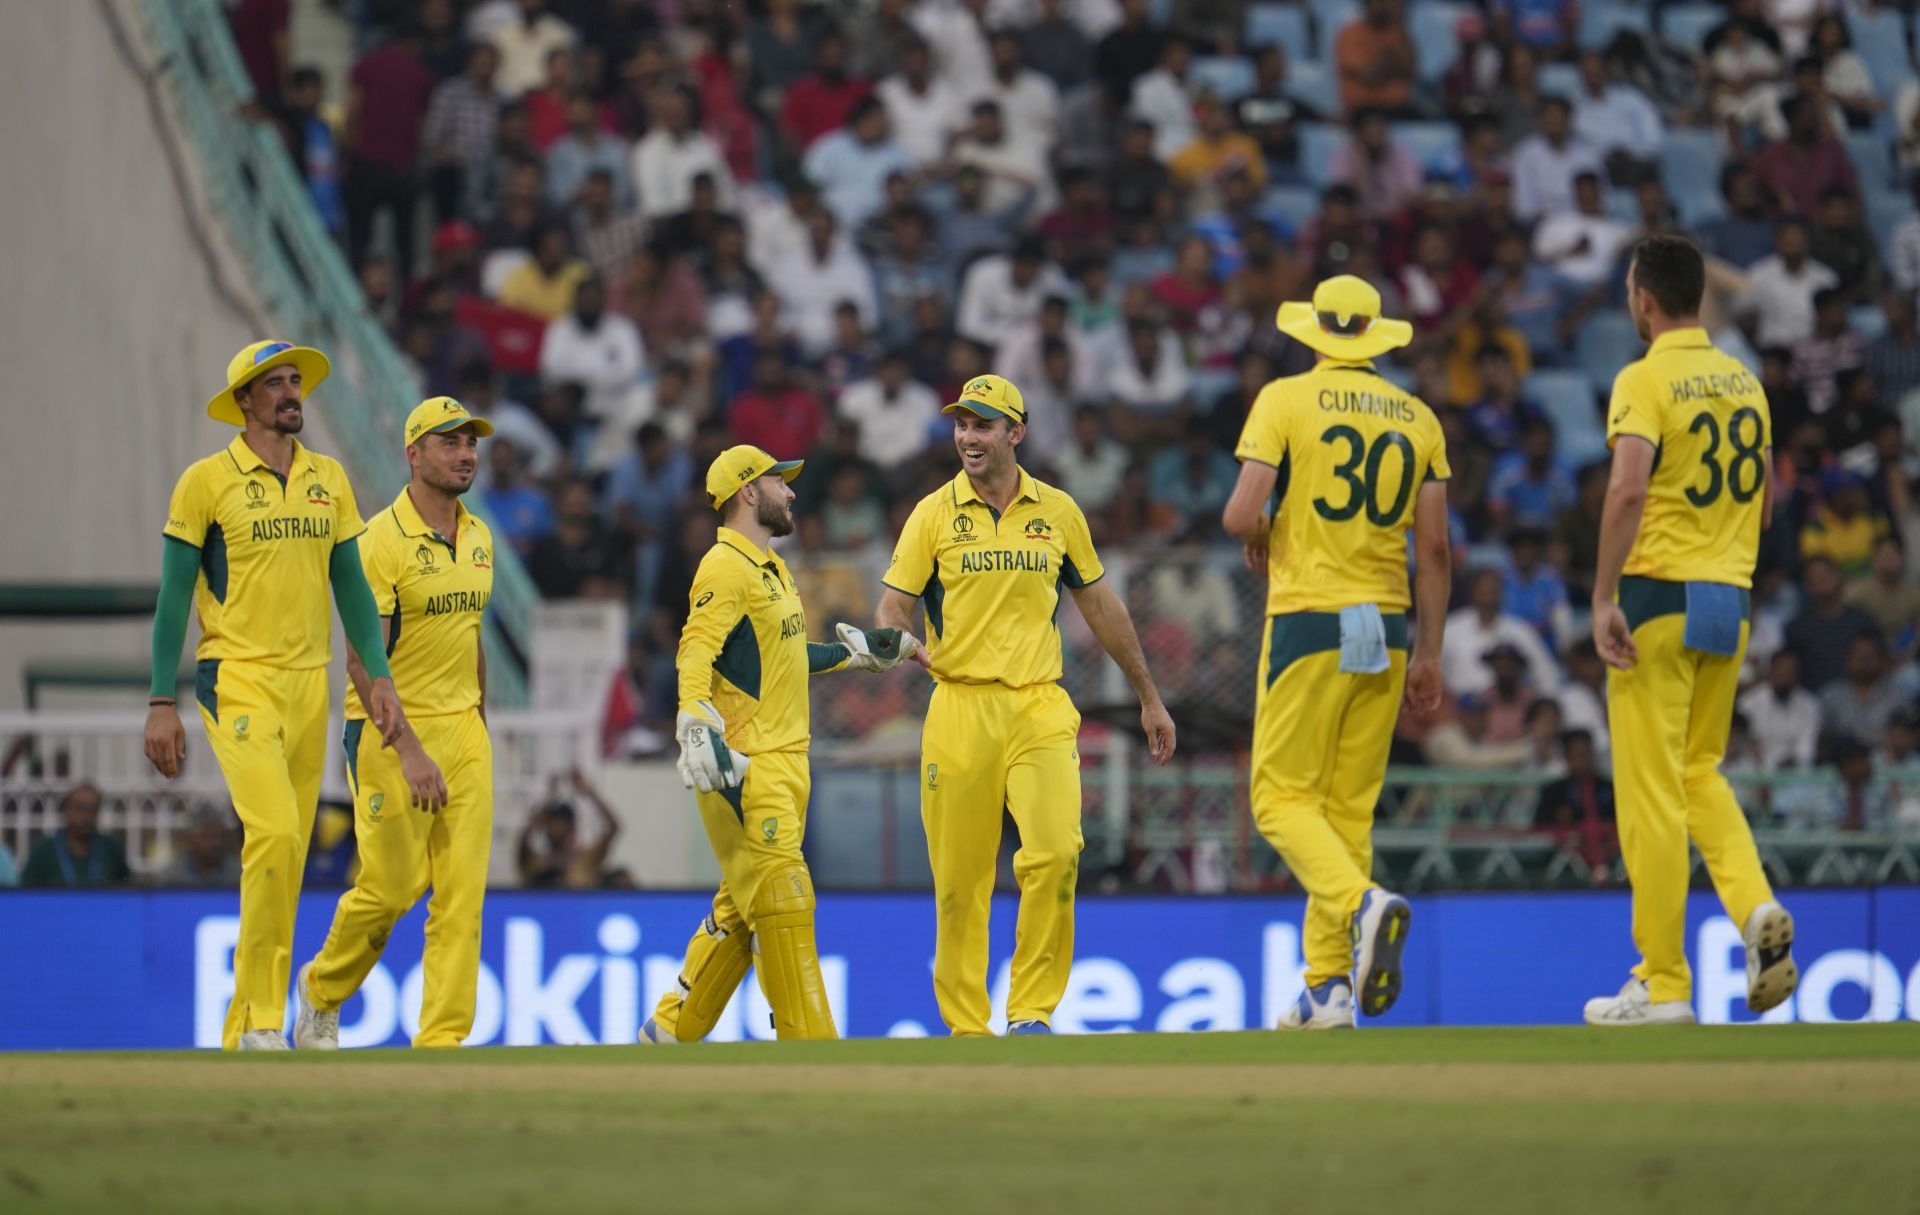 Australia have been out of sorts in the competition so far. (Pic: AP)